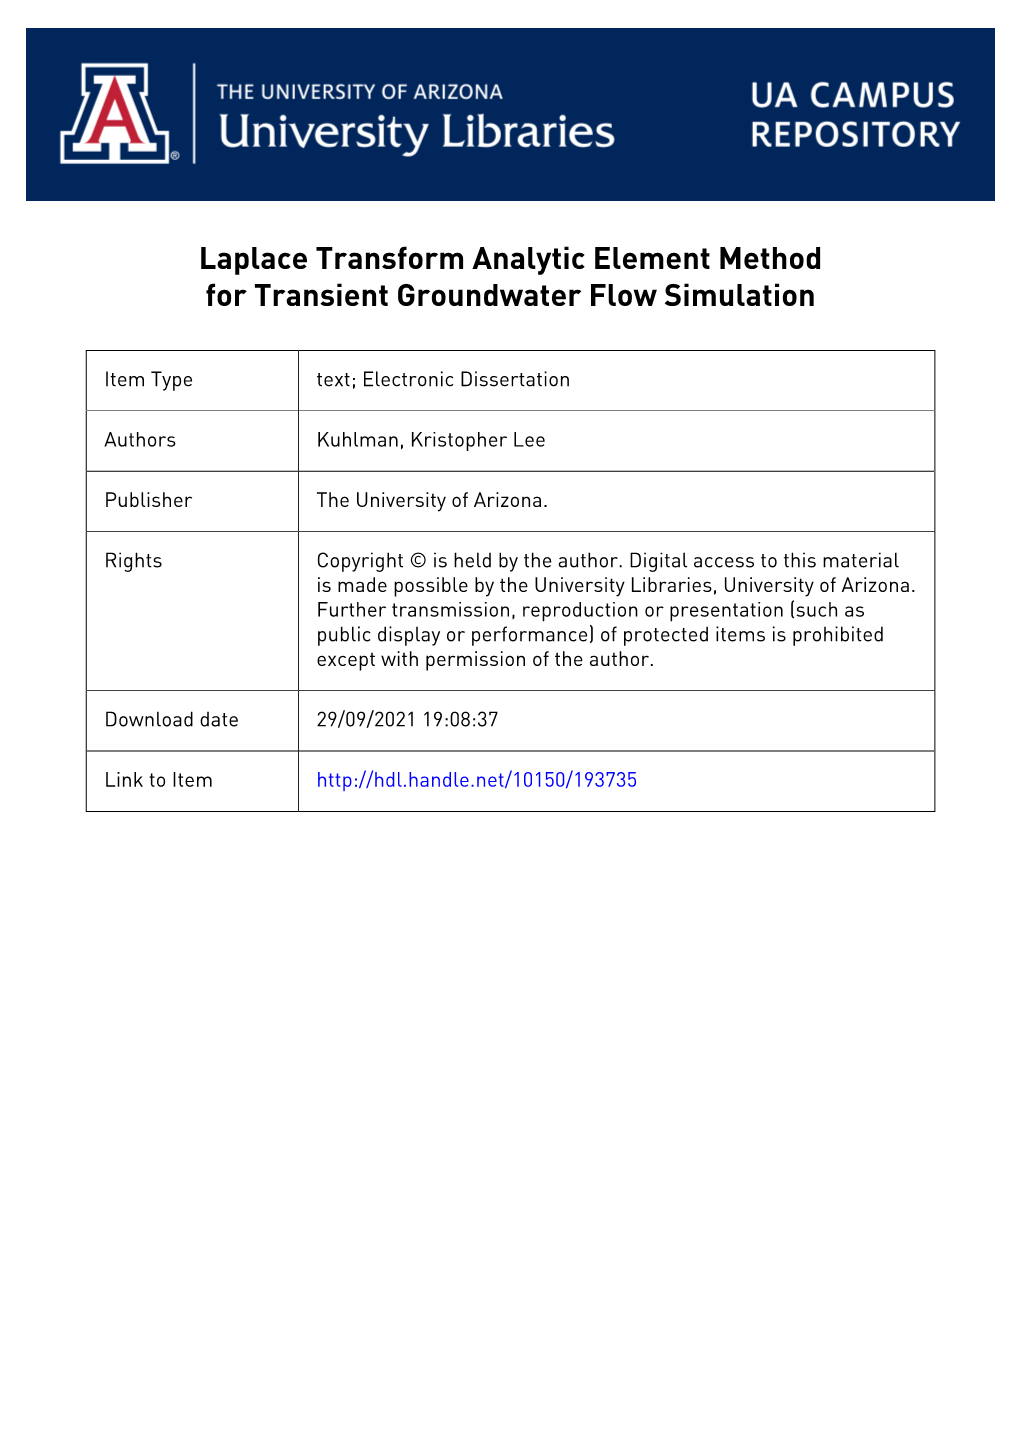 Laplace Transform Analytic Element Method for Transient Groundwater Flow Simulation